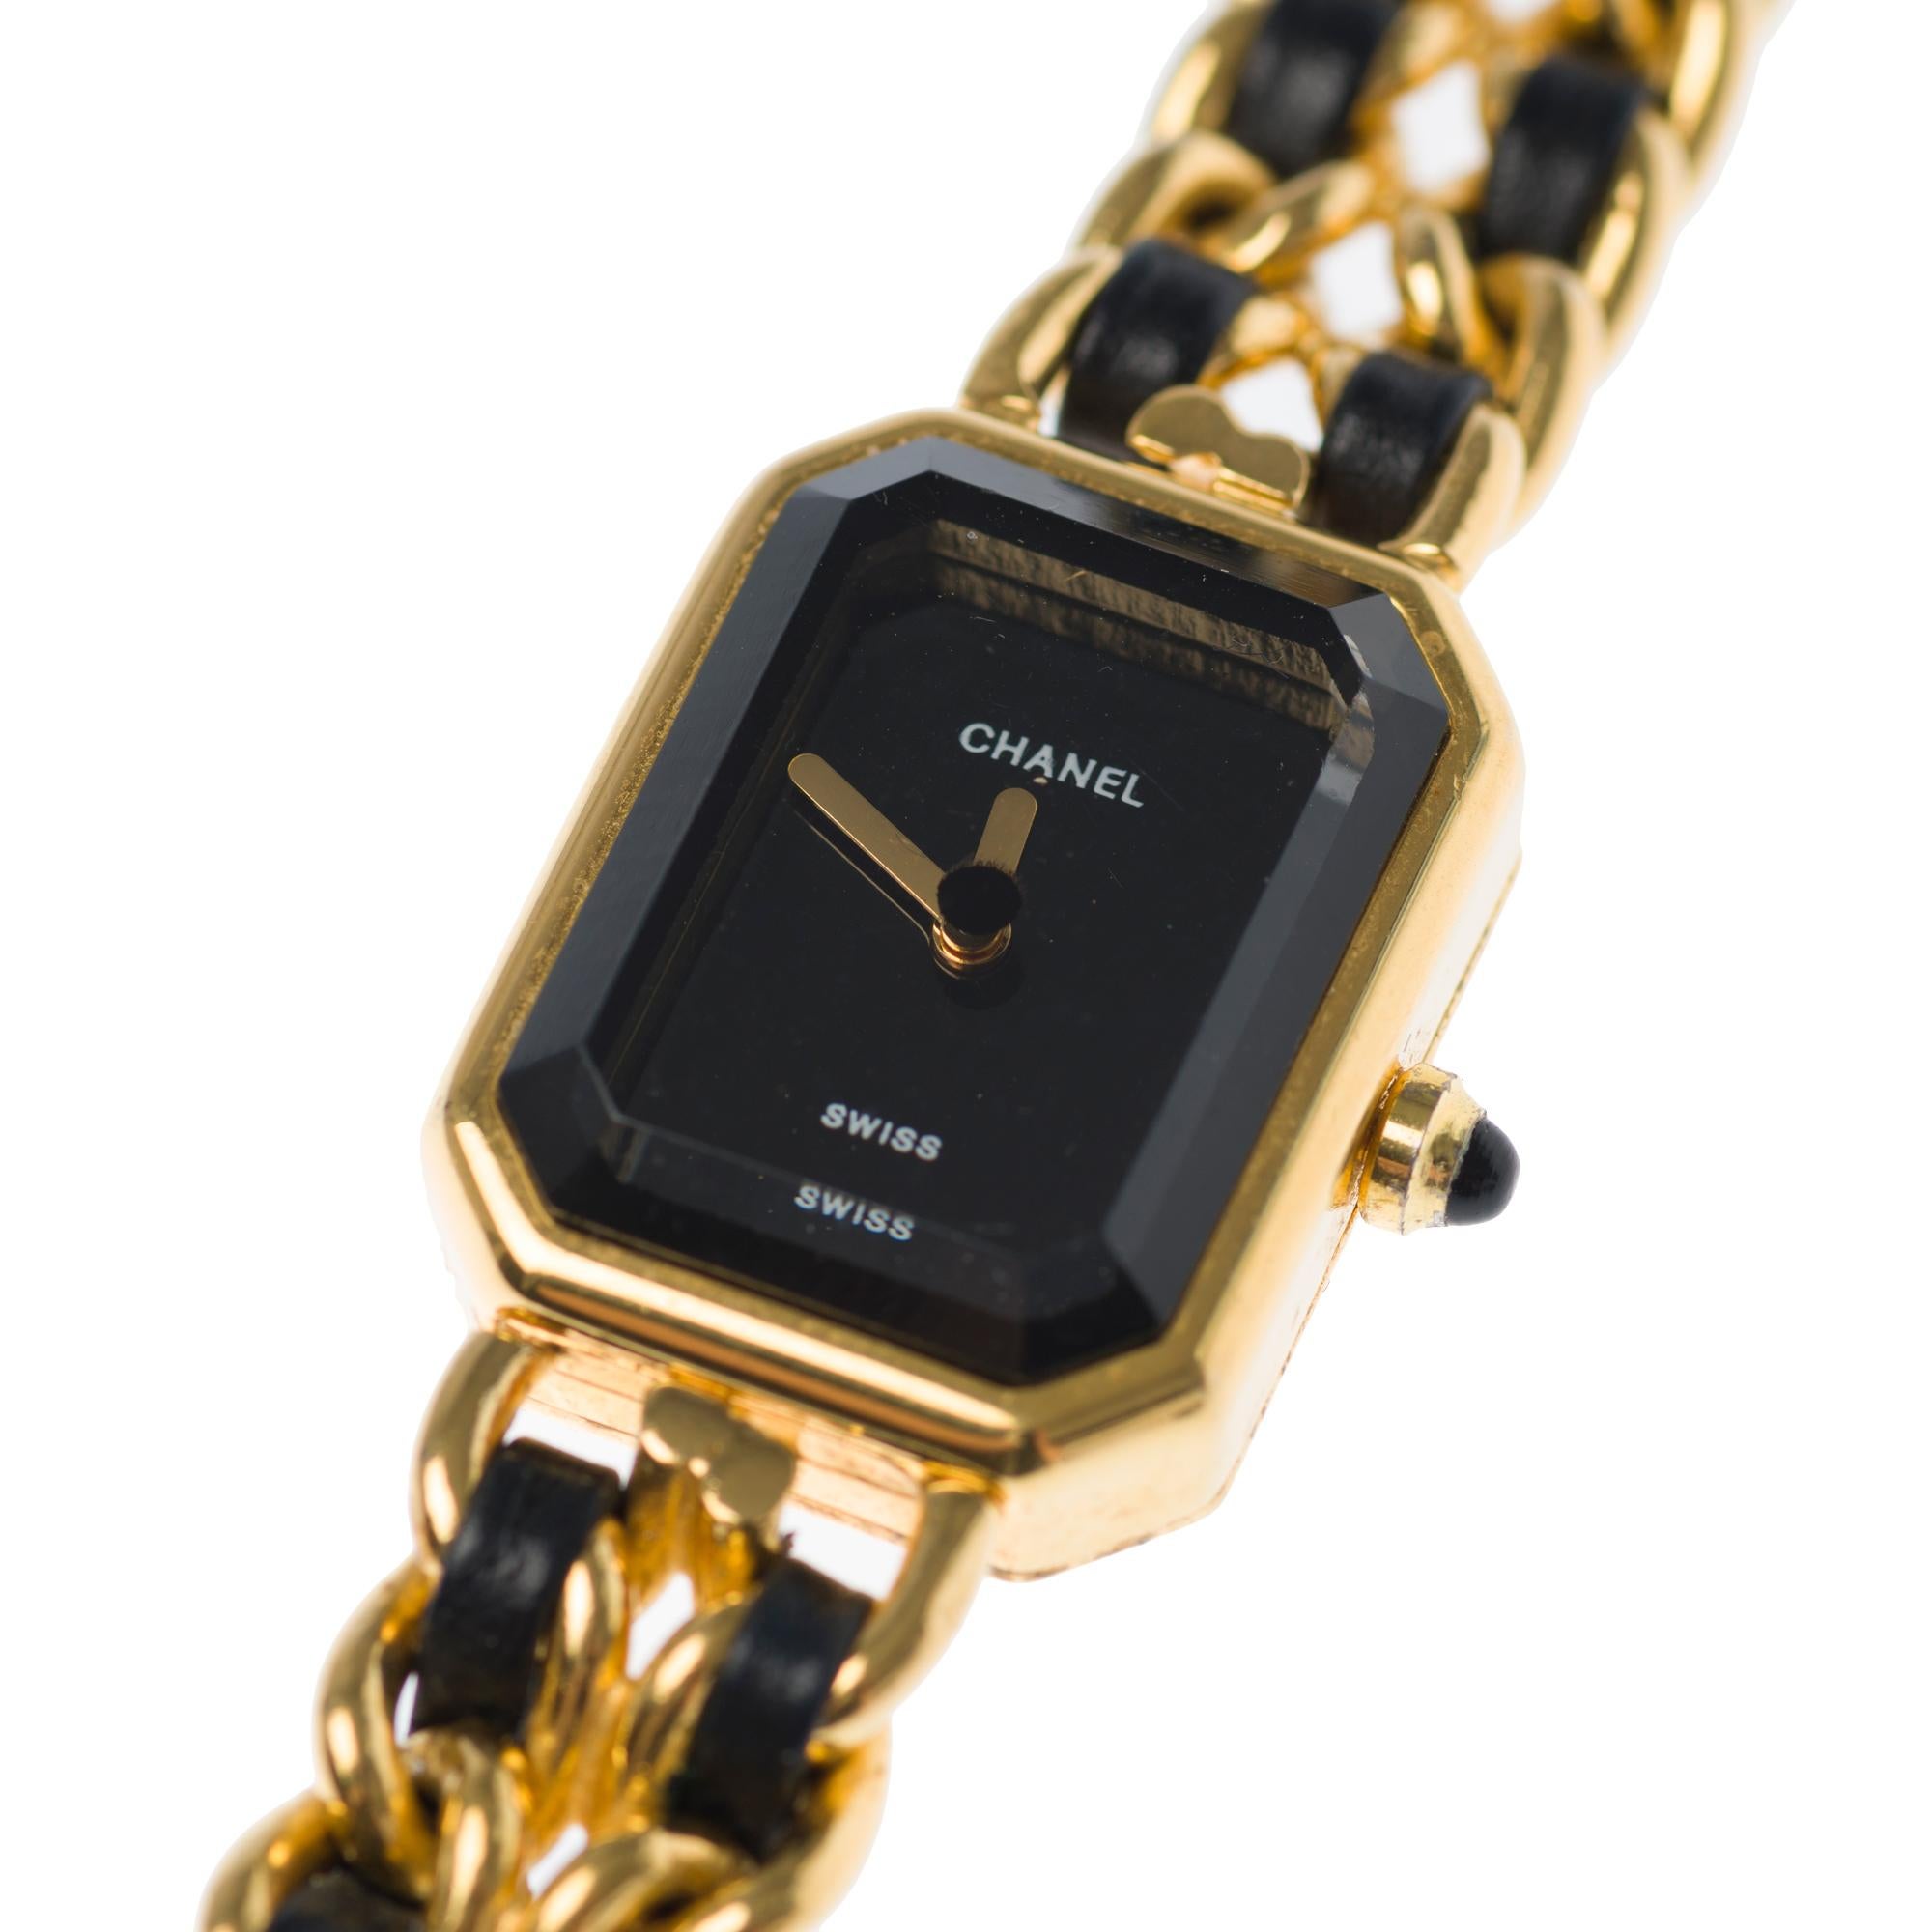 Amazing Chanel Première lady wristwatch in yellow gold plated 3